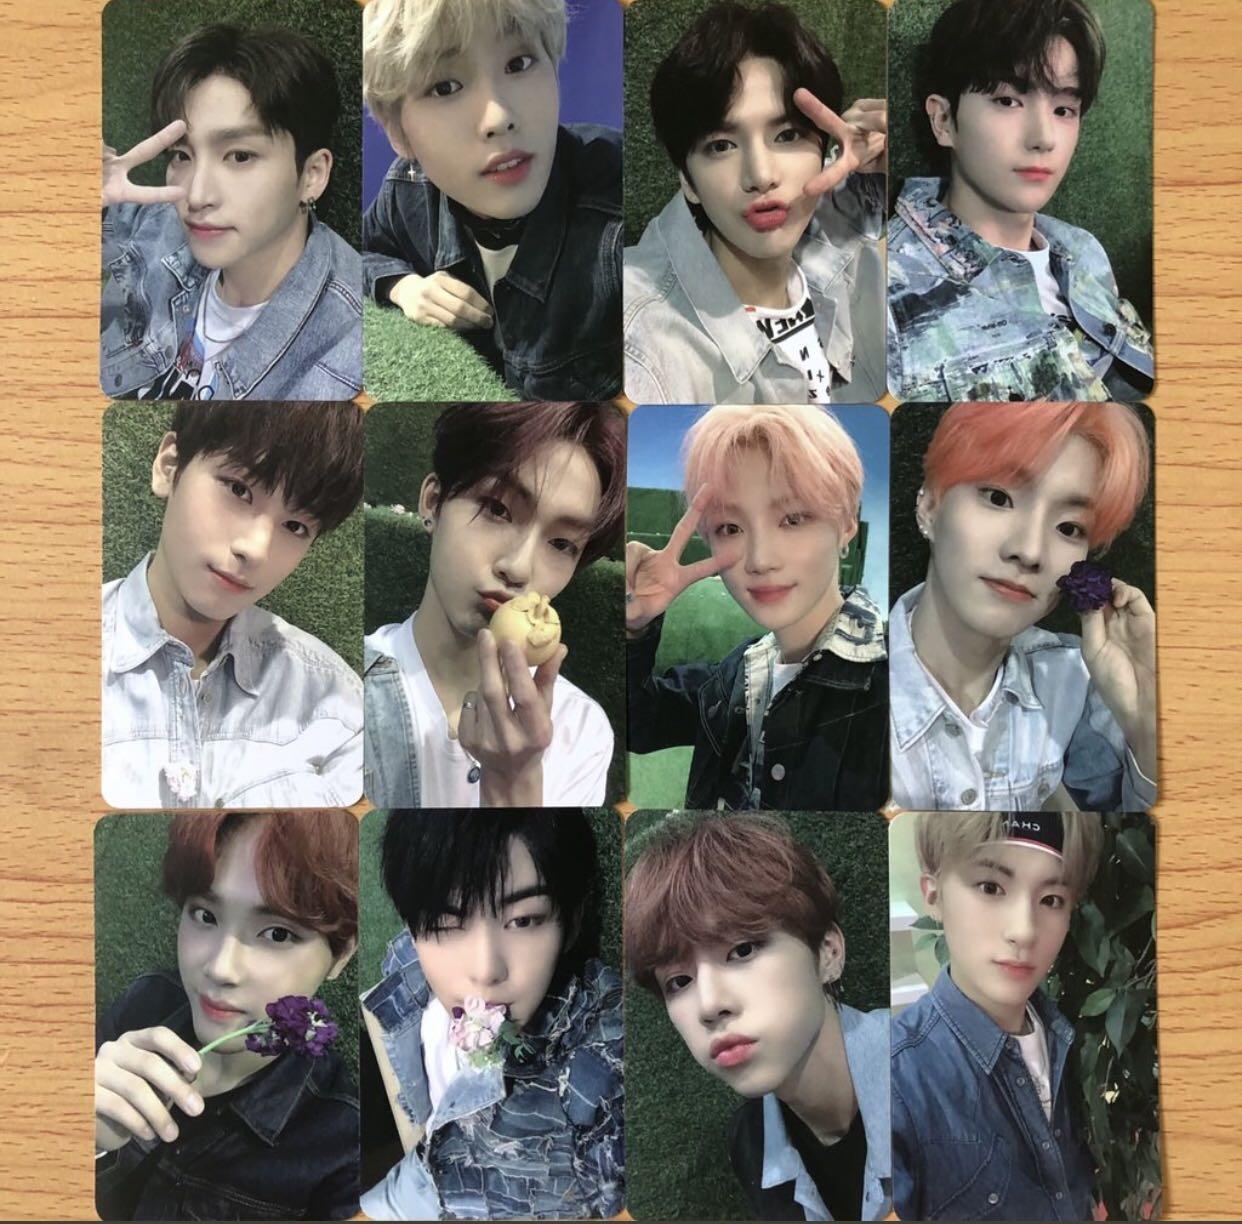 Fast Po Rare The Boyz Bloom Bloom Scratch Unreleased Broadcast Pc Hobbies Toys Memorabilia Collectibles K Wave On Carousell